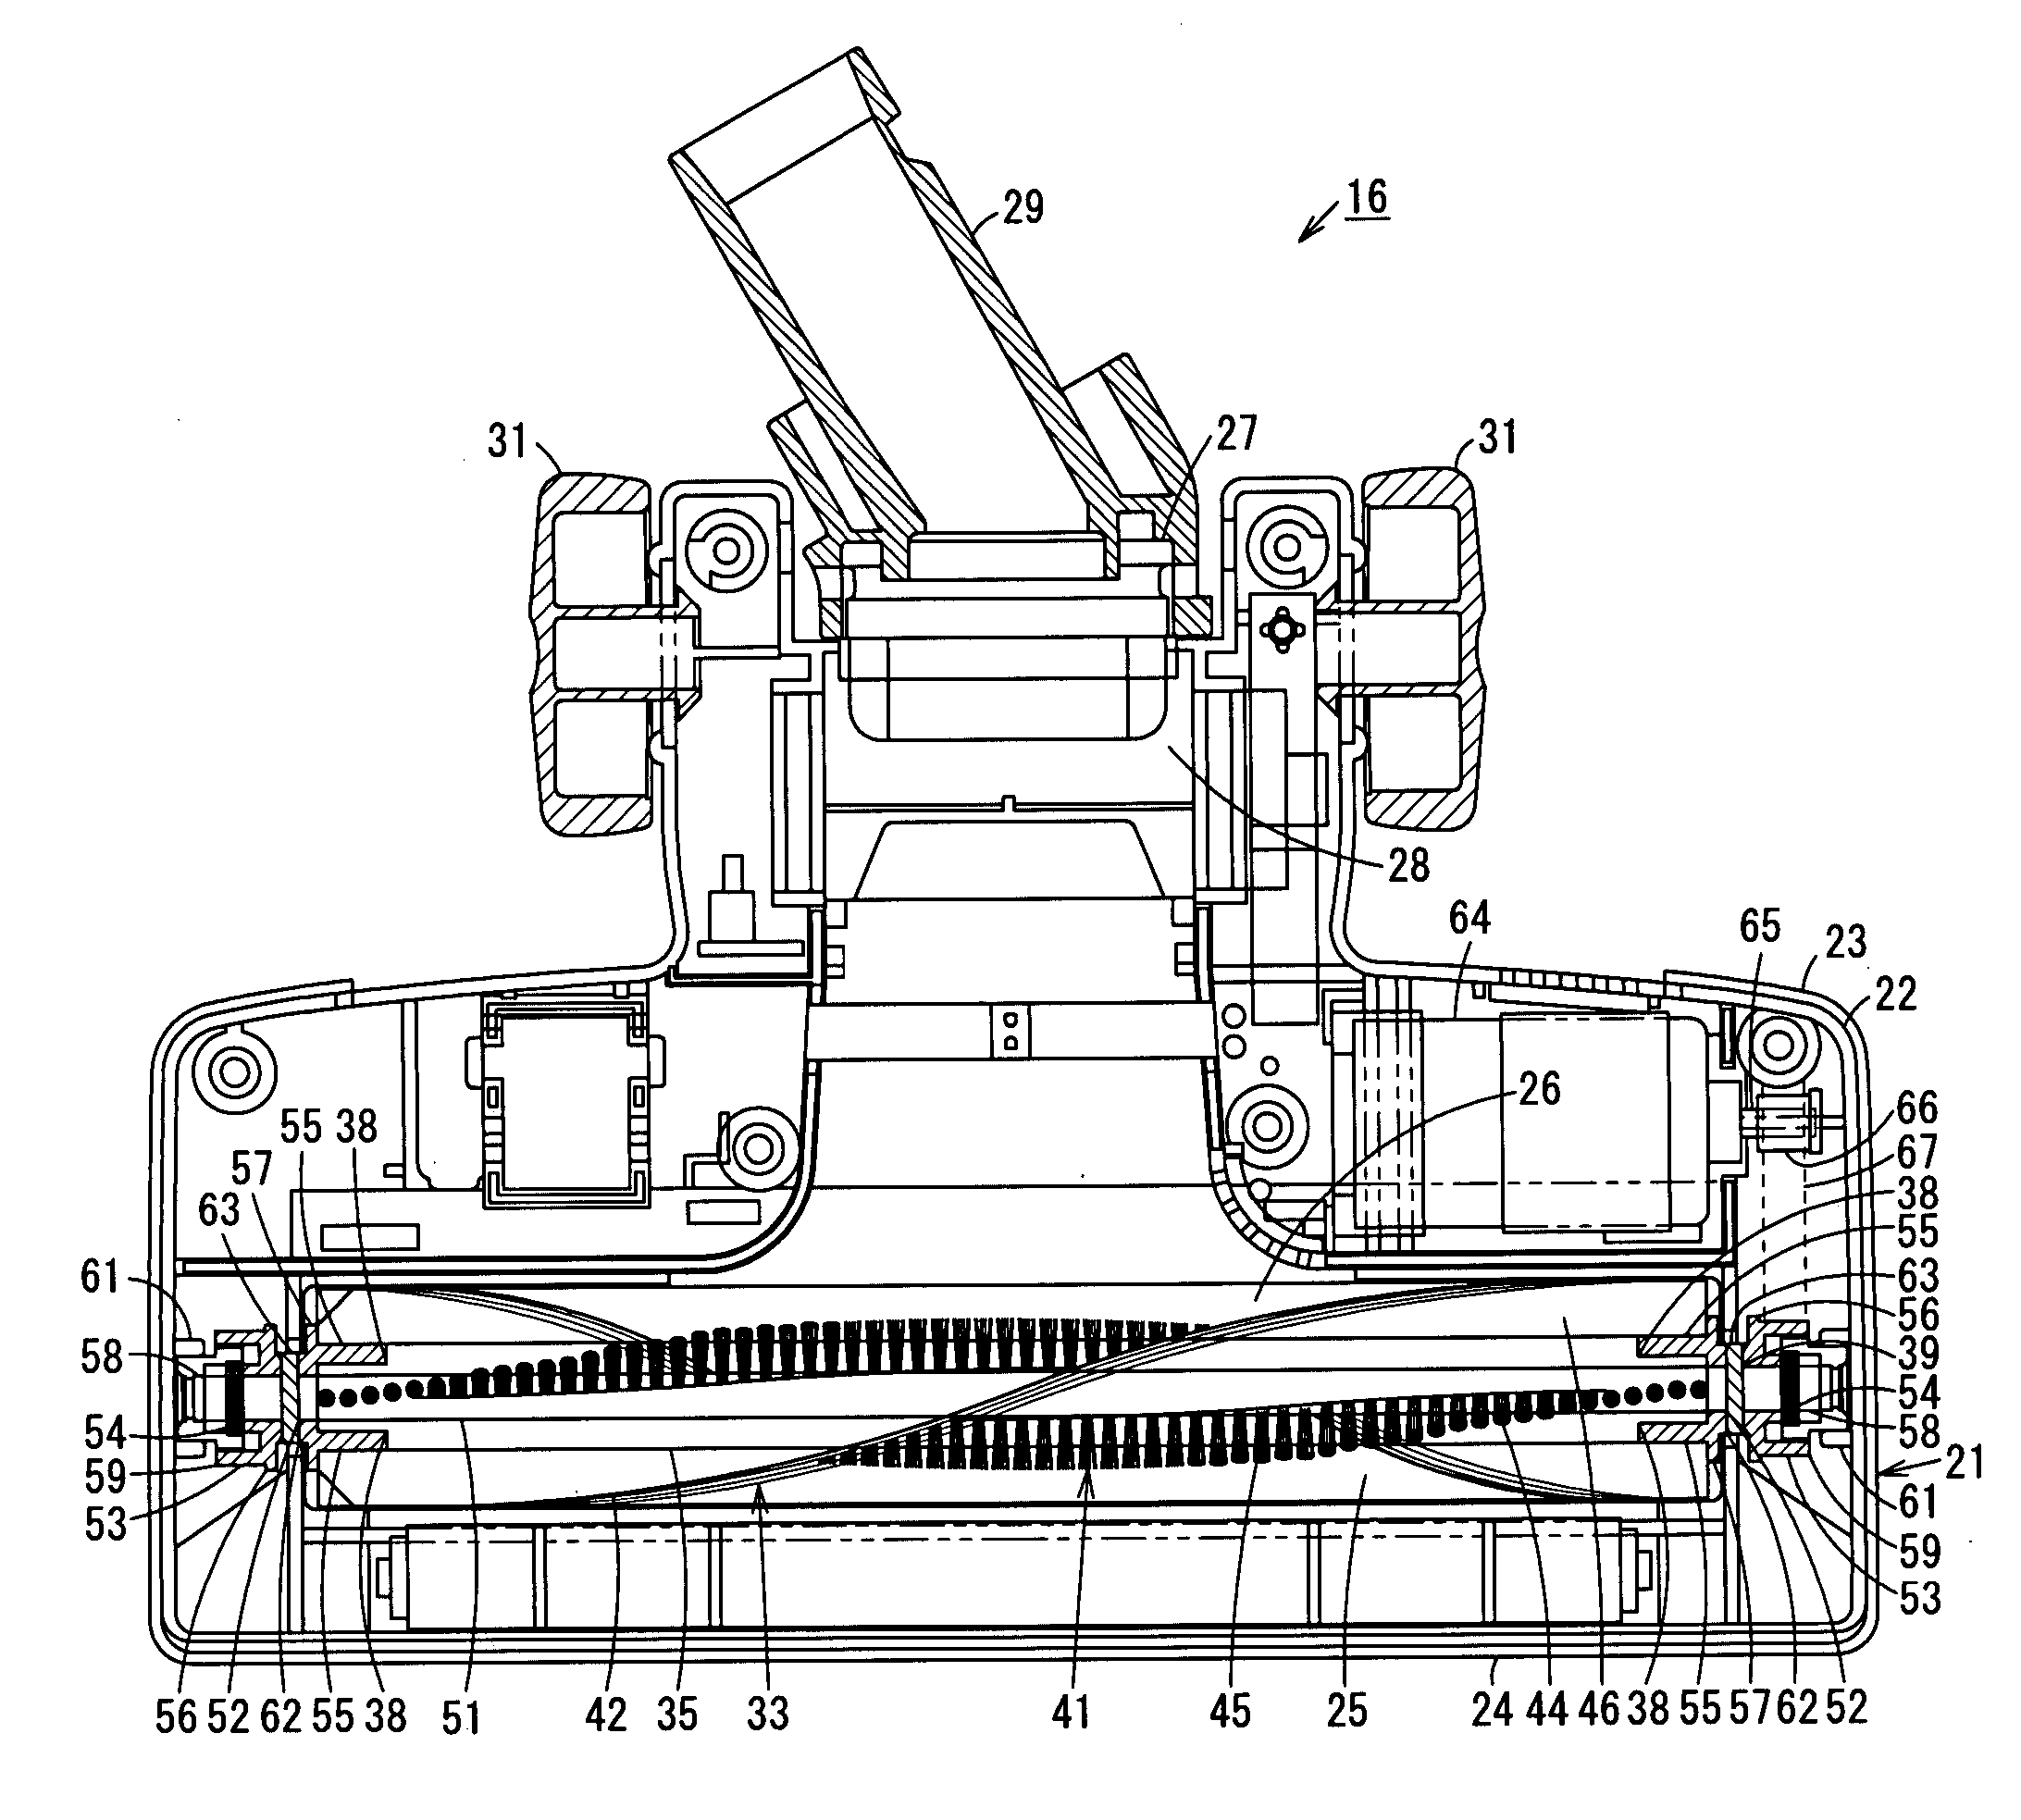 Rotary cleaning body, suction port body of vacuum cleaner, and production method of rotary cleaning body